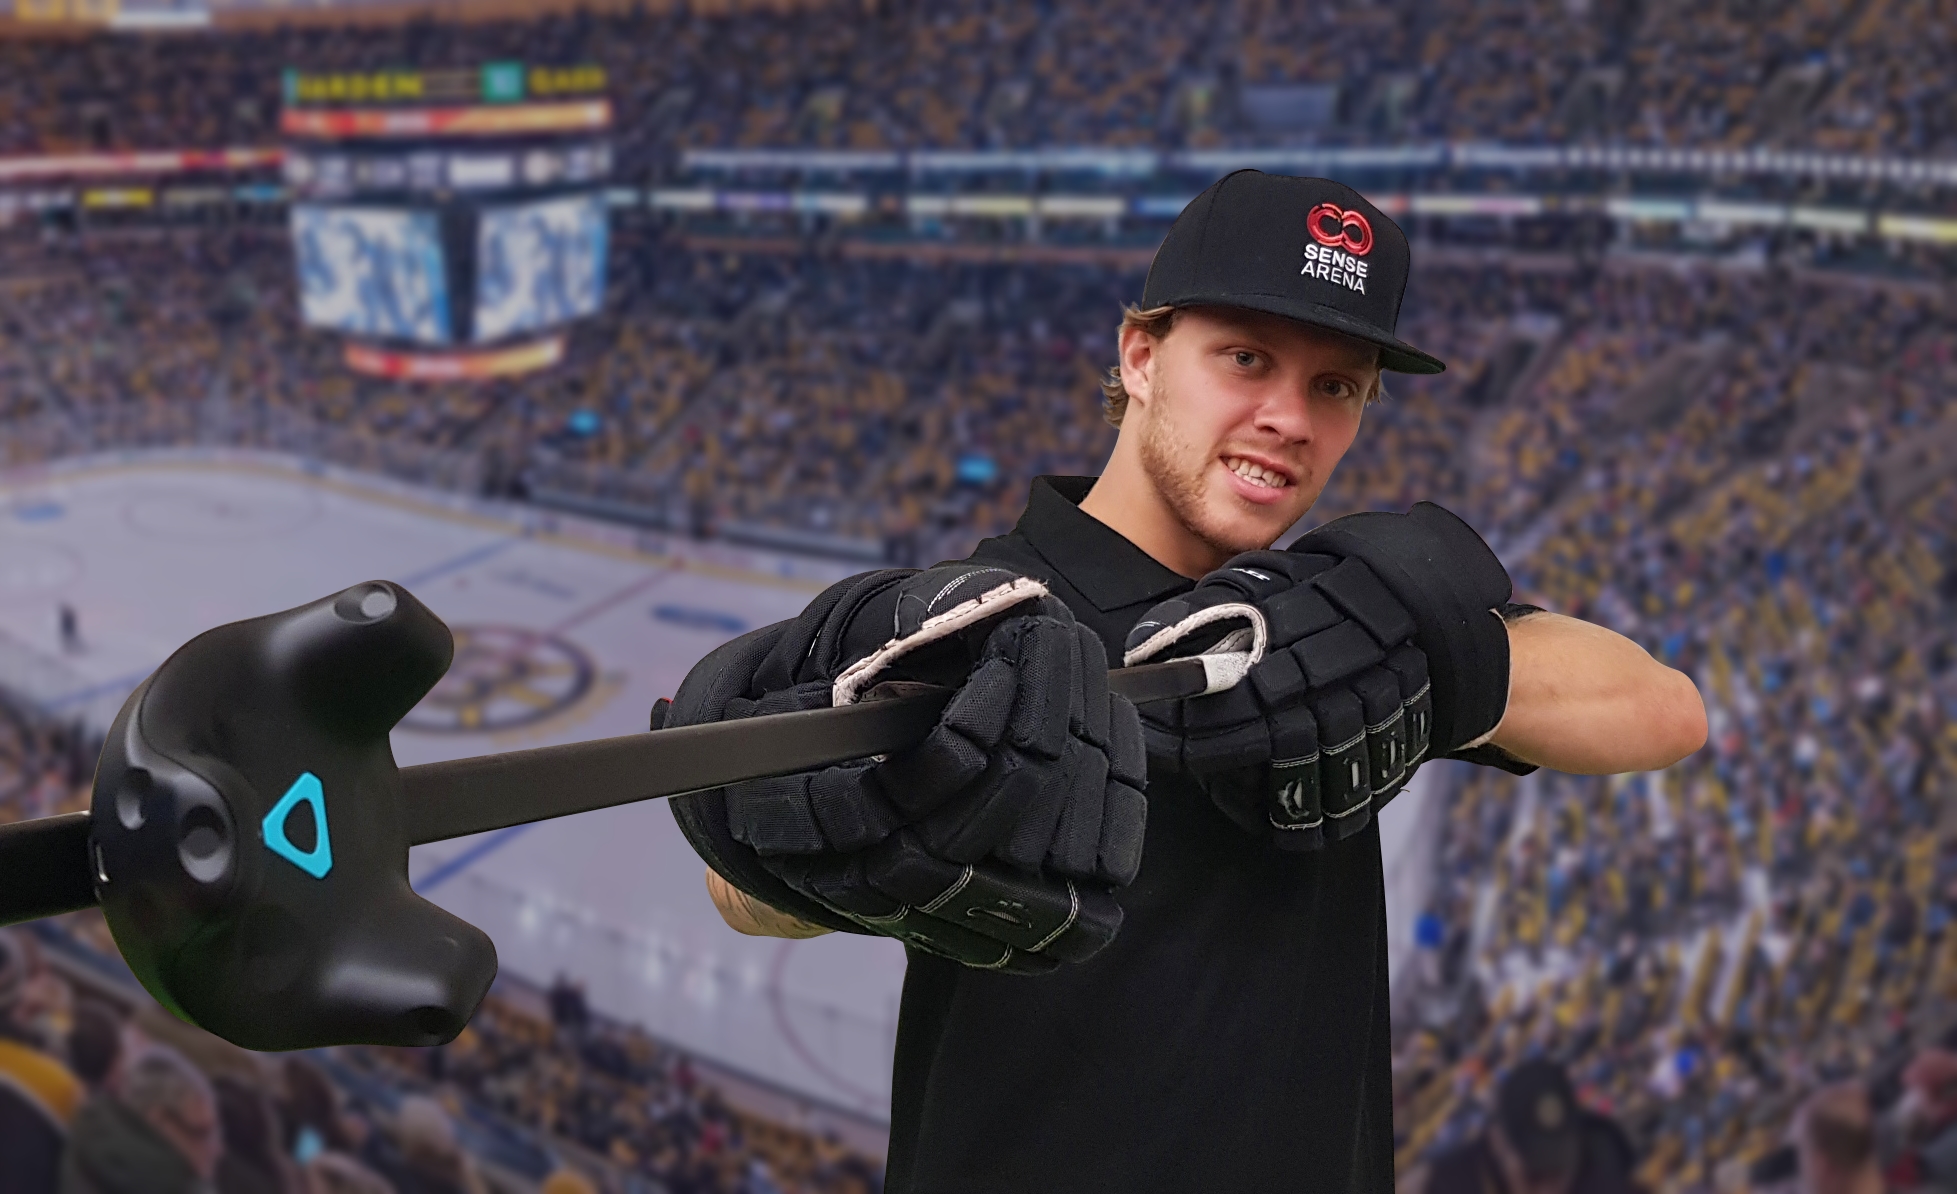 Strengthening Your Muscle Memory With Vr Hockey Training Vrscout